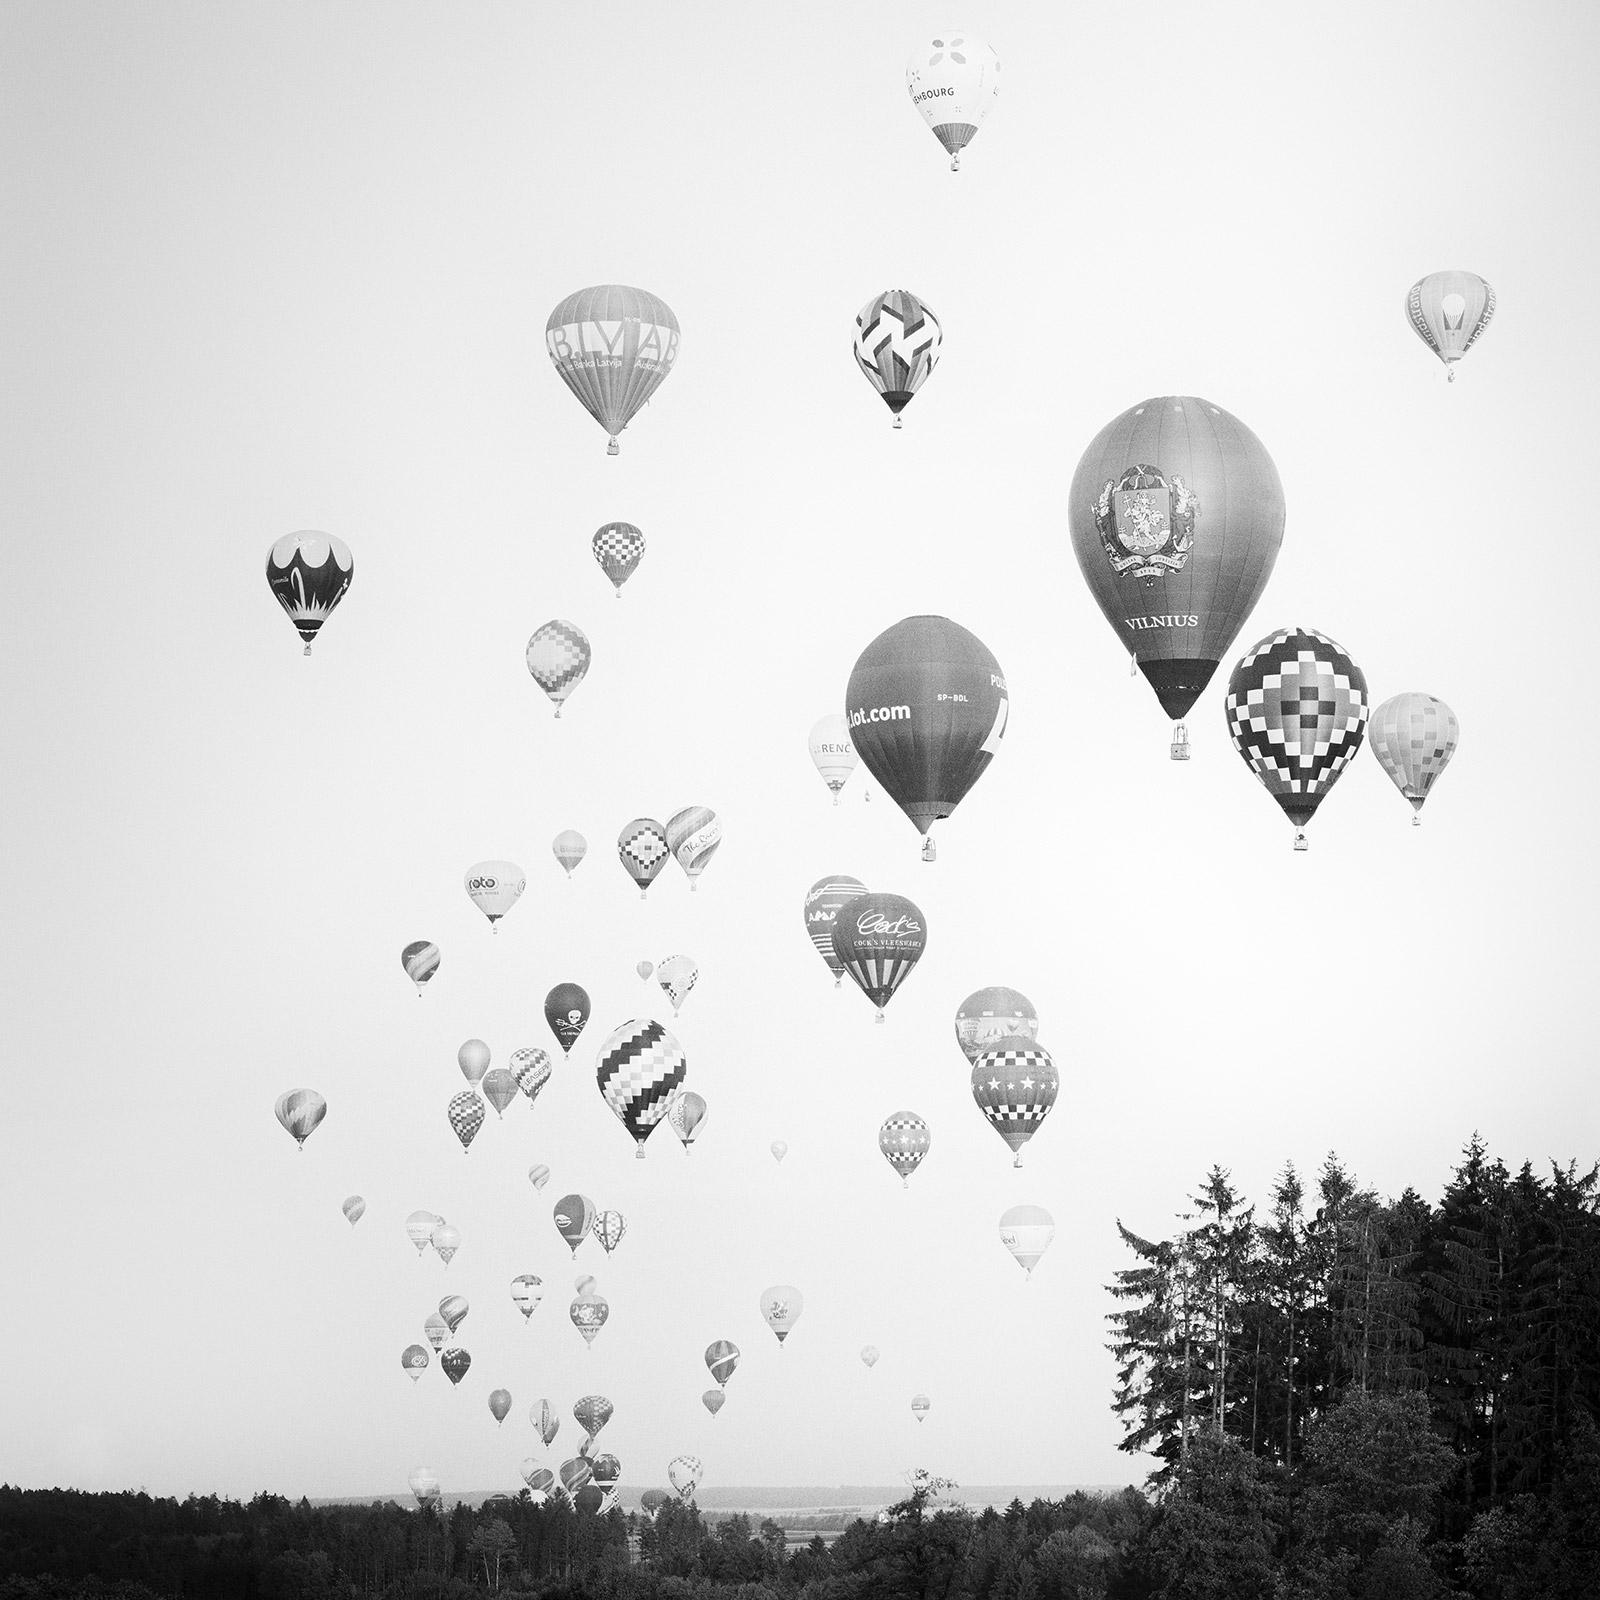 Gerald Berghammer Black and White Photograph - Hot Air Balloon World Championship, black and white art landscape photography